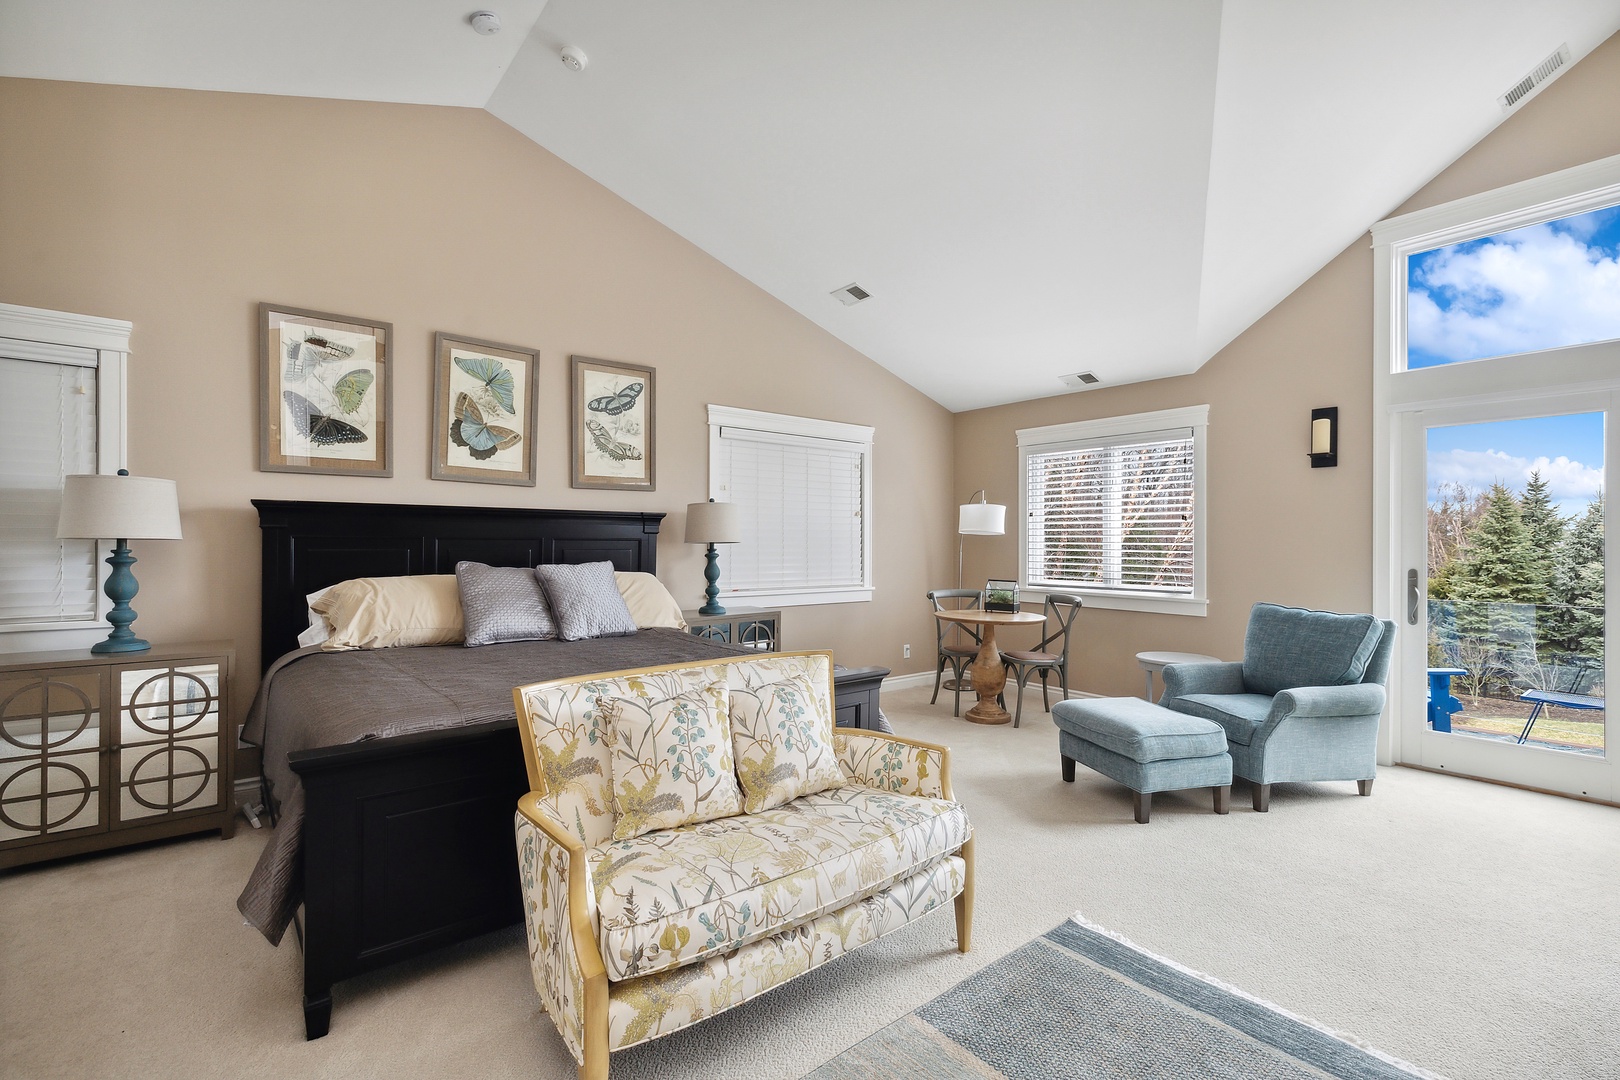 Escape to the spacious primary bedroom, where comfort and style meet in perfect harmony.